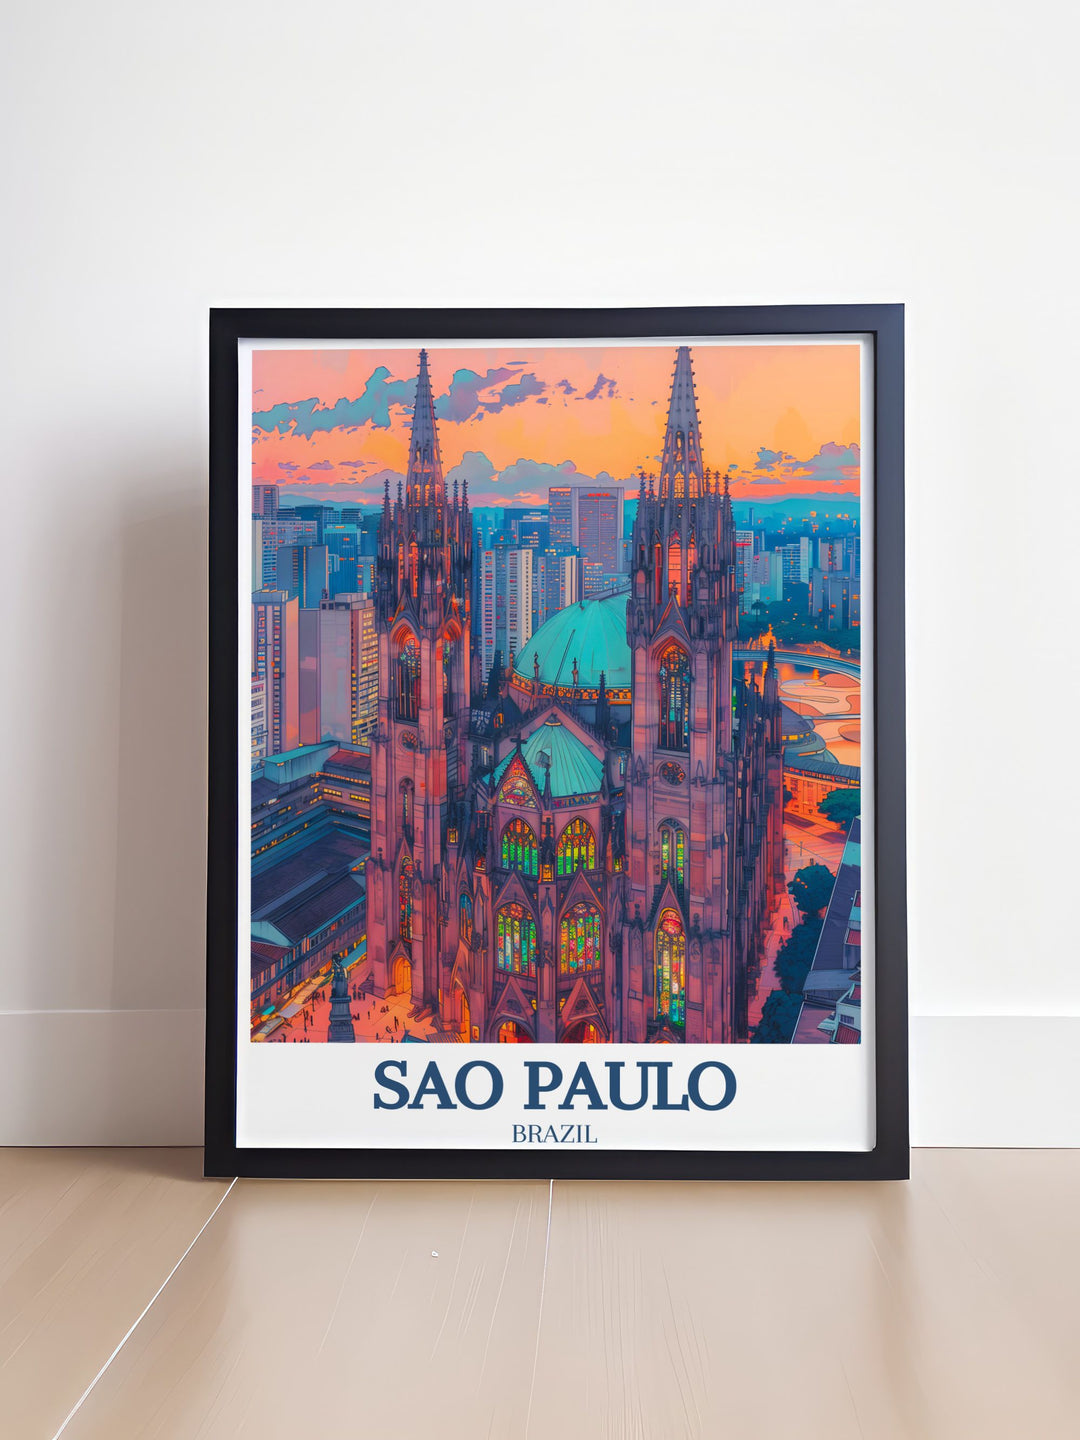 Detailed art print of Praça da Sé square in Sao Paulo, showcasing the vibrant life, cultural landmarks, and bustling activity in the heart of the city.